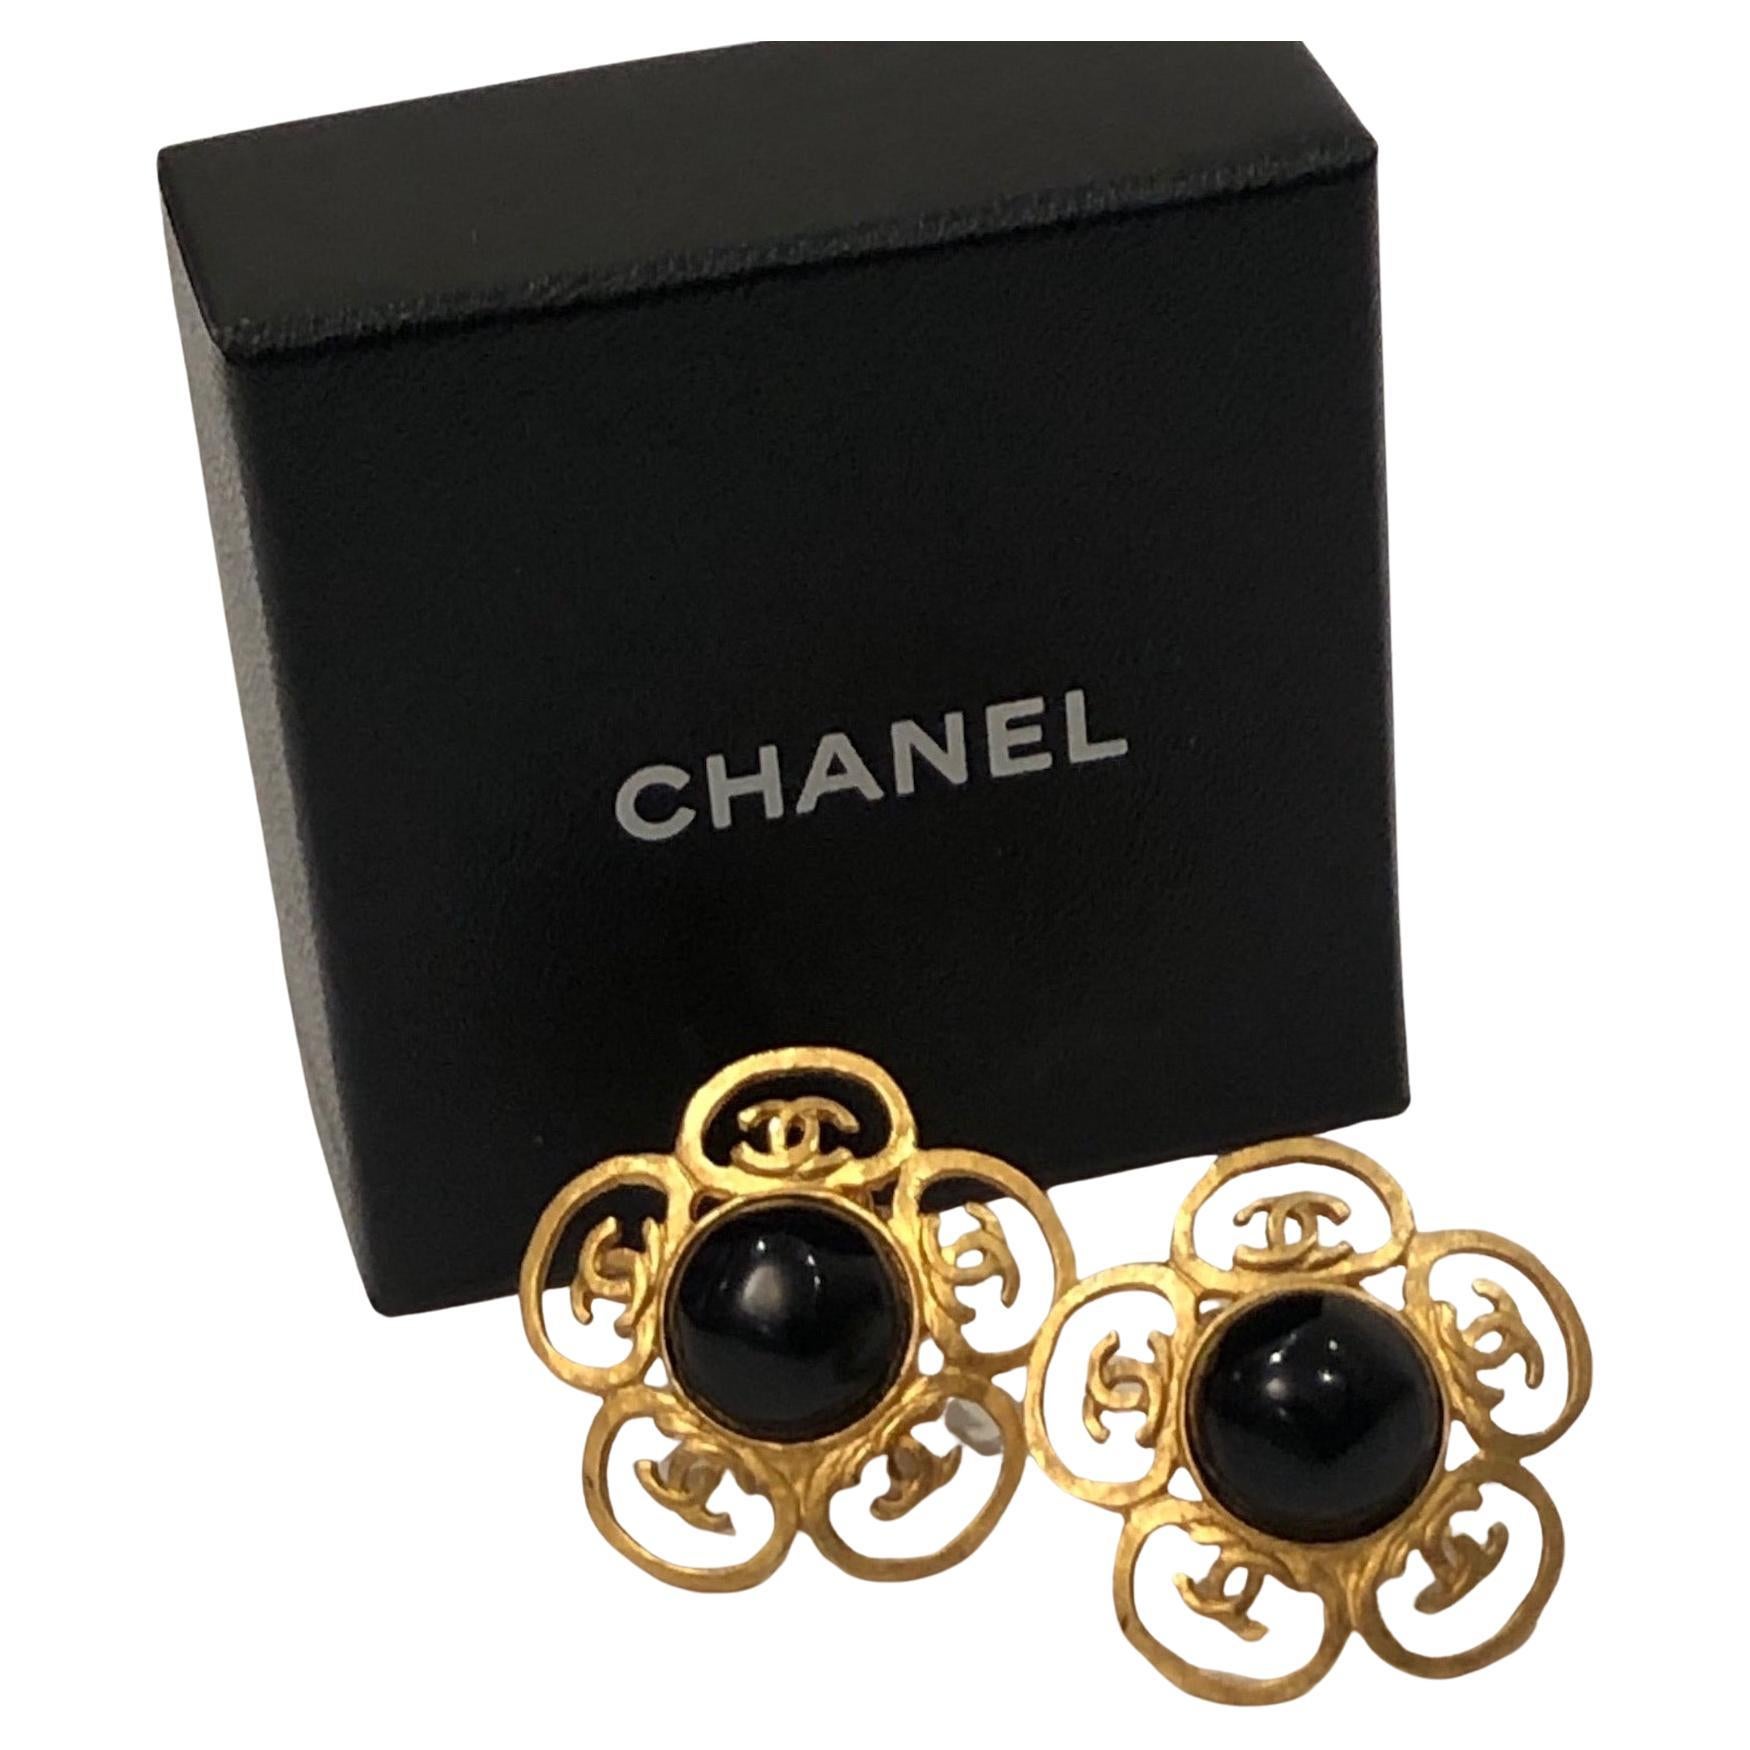 CHANEL Earrings 1995 Vintage Black Gripoix Gold Toned CC Flower Clip On W/Box For Sale